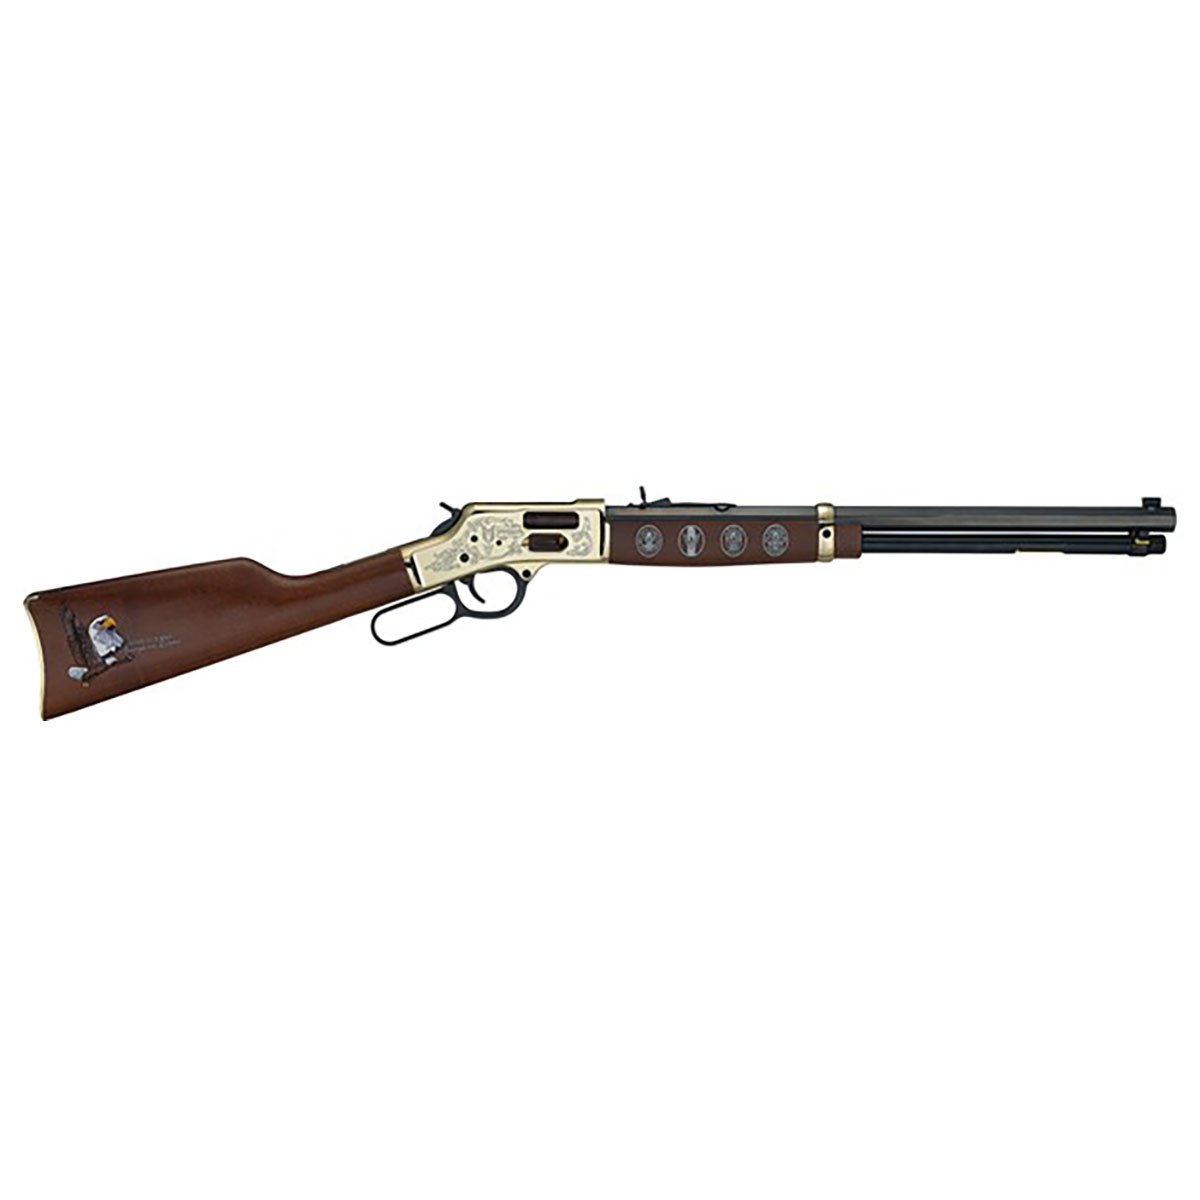 HENRY REPEATING ARMS - EAGLE SCOUT CENTENNIAL TRIBUTE ED 44 MAG/44 SPL LEVER ACTION